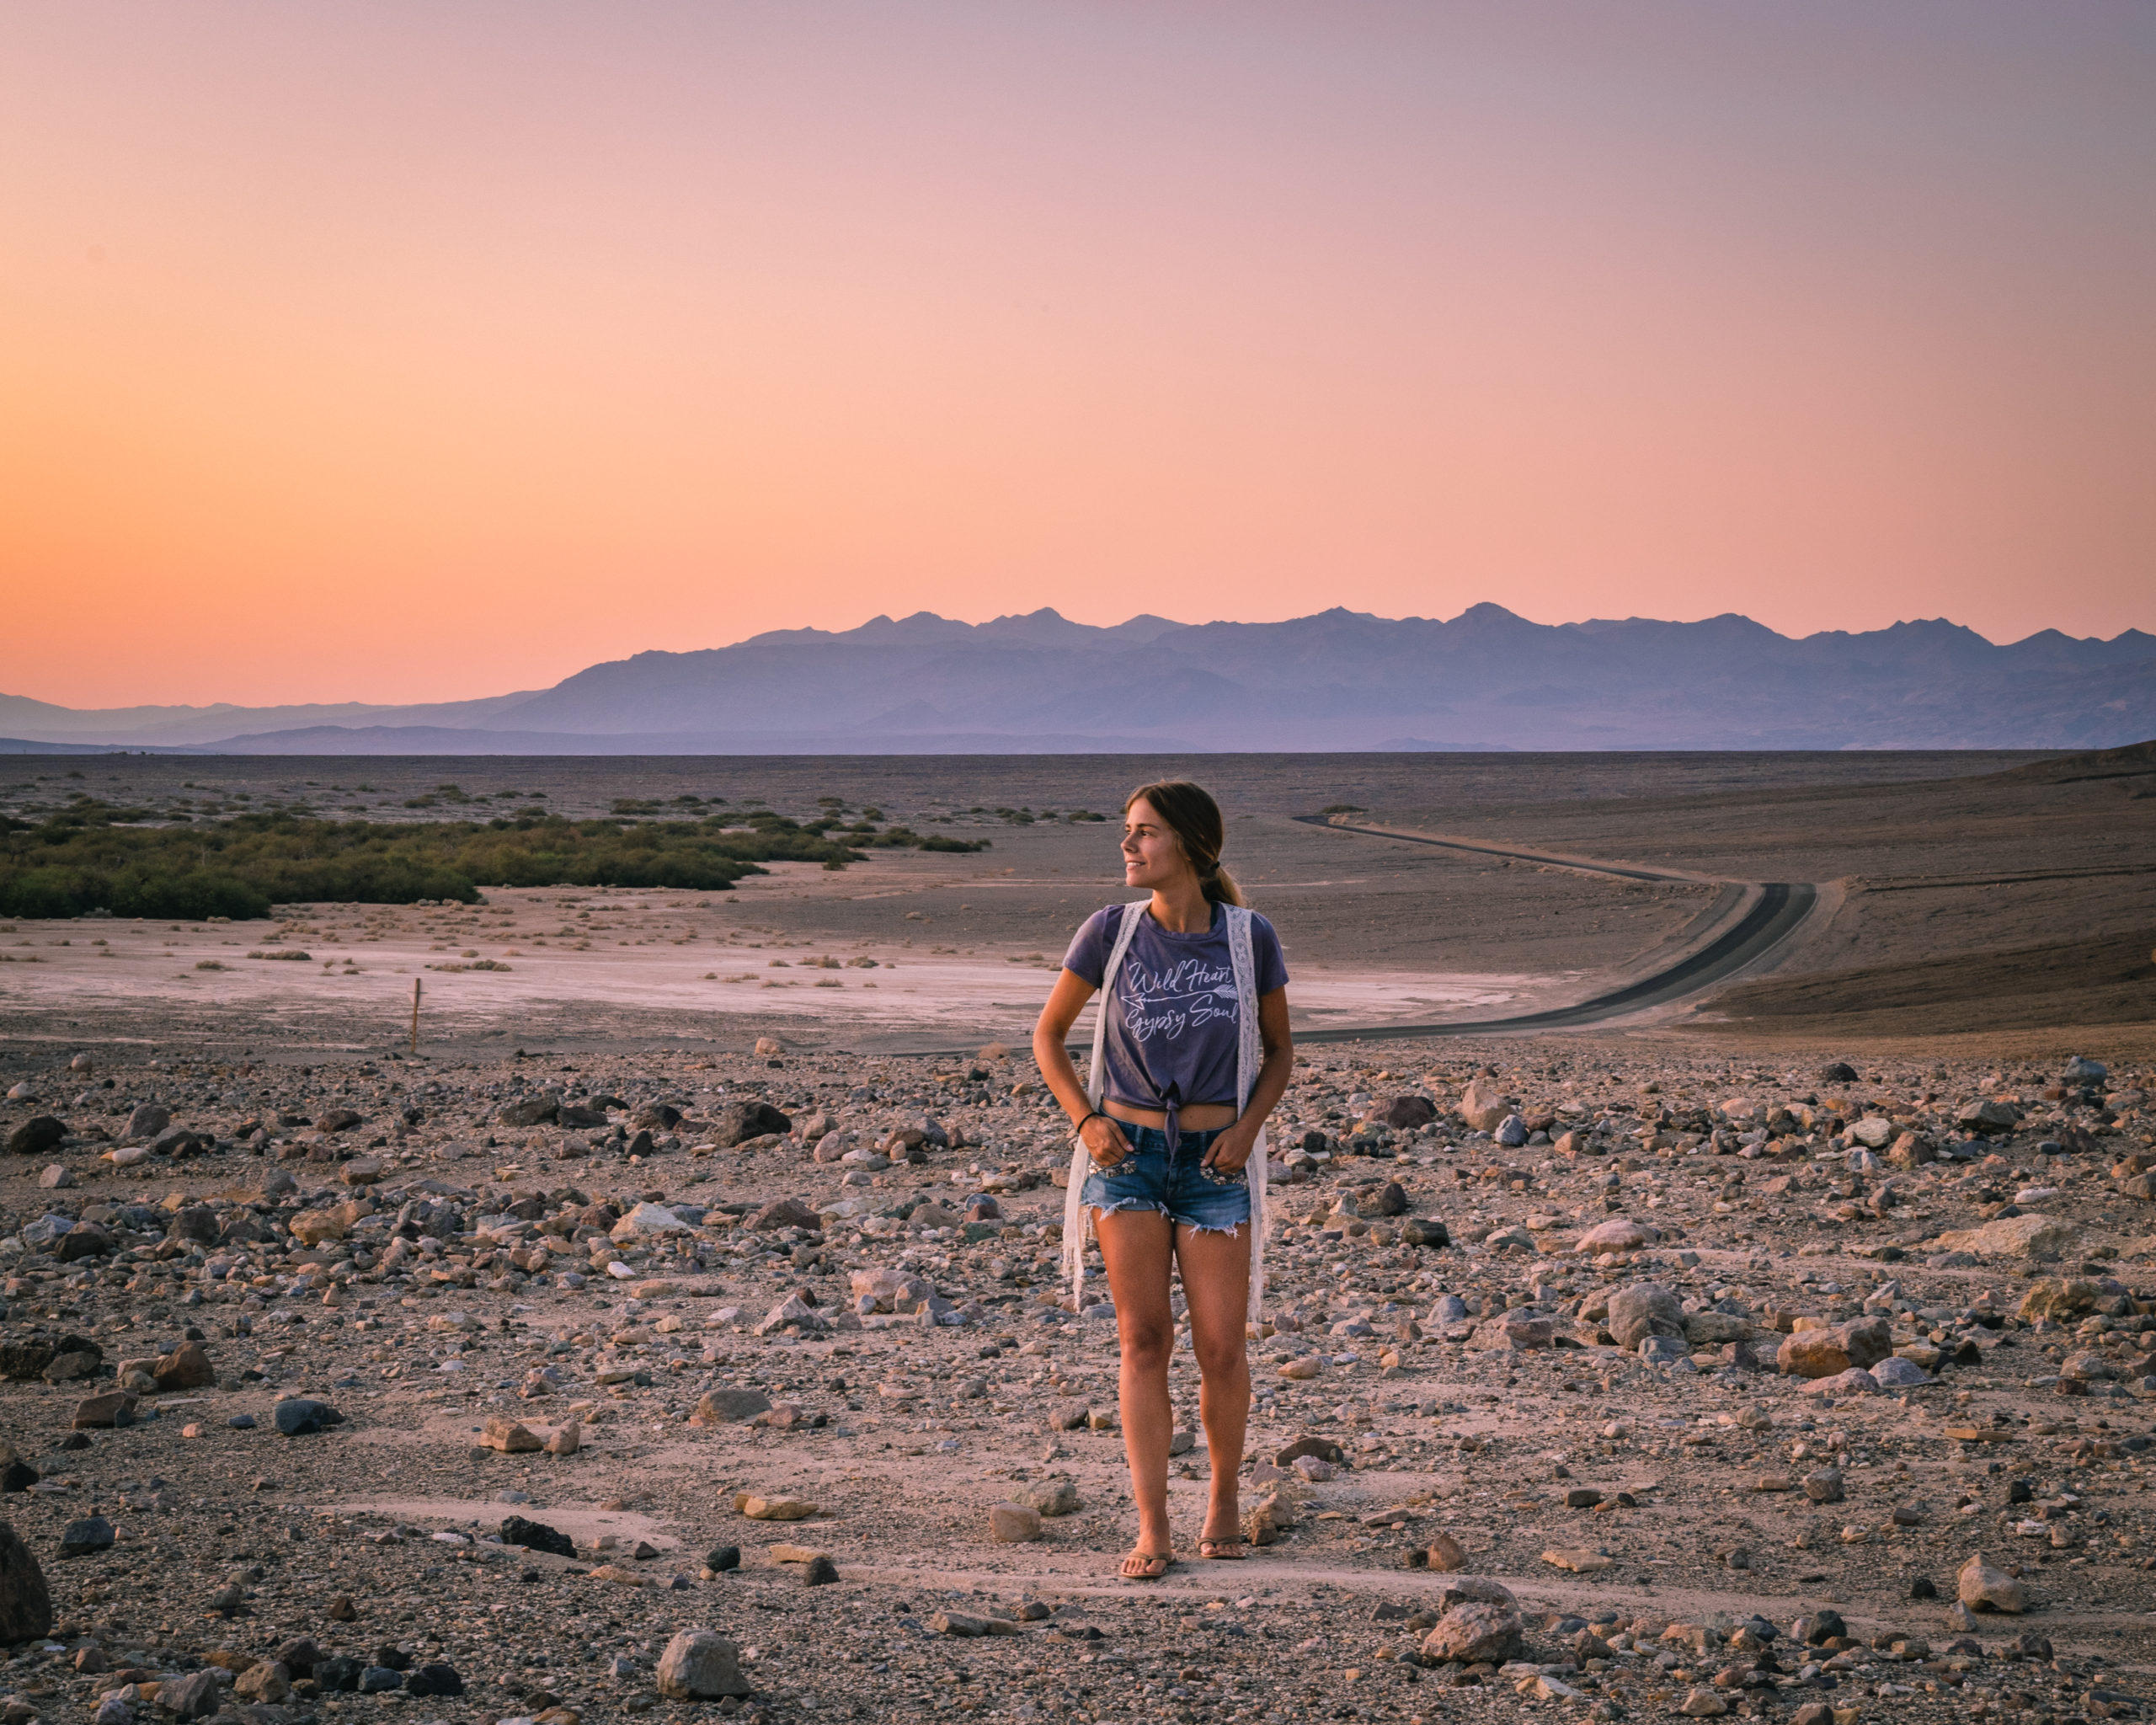 Spending 2 Days in Death Valley National Park